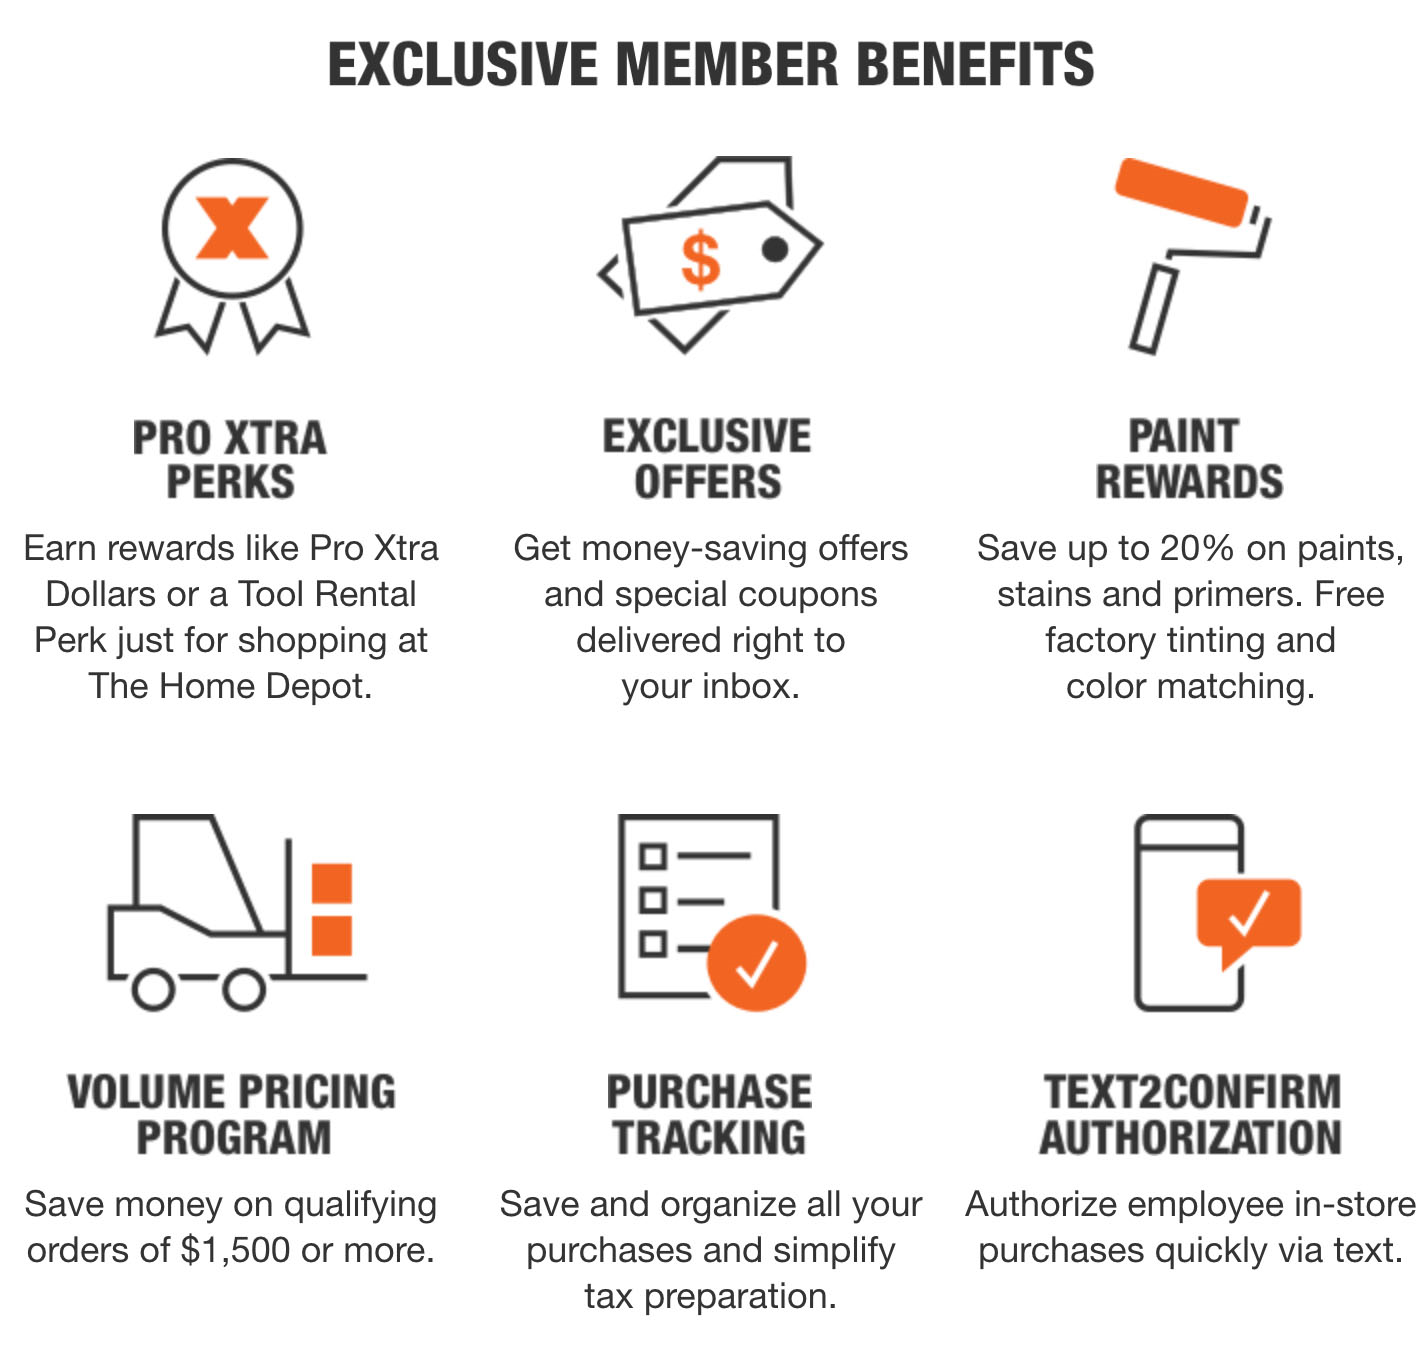 Exclusive member benefits of The Home Depot’s loyalty program